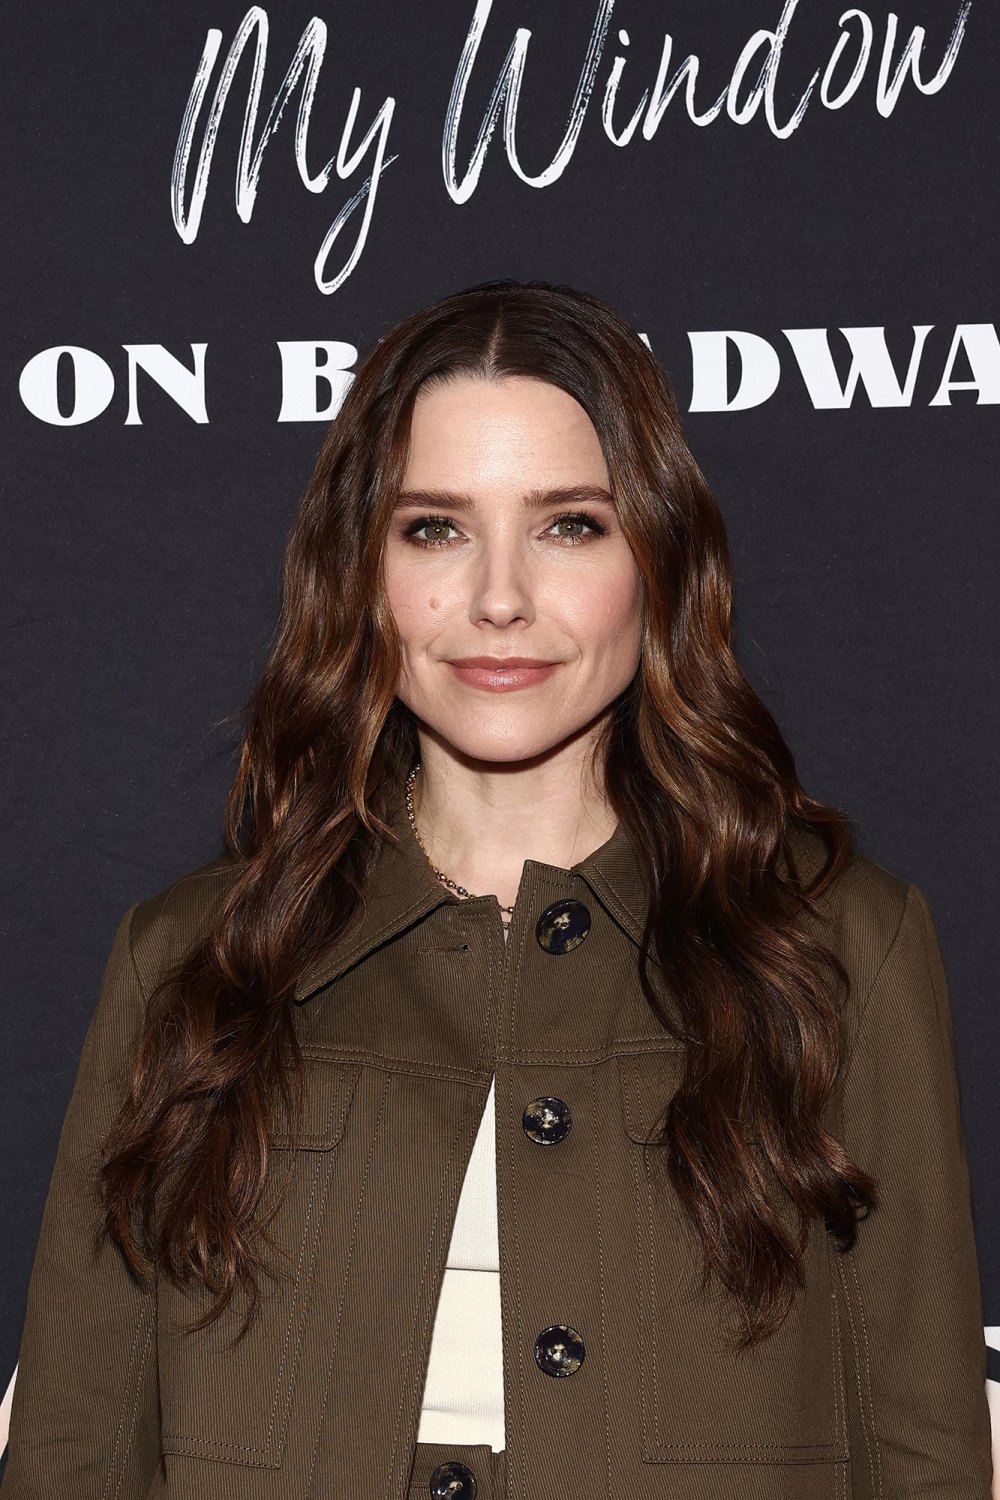 Sofia Bush Recalls Least Favorite Fashion and Beauty Looks of Her Career The Red Carpet Haunts Me